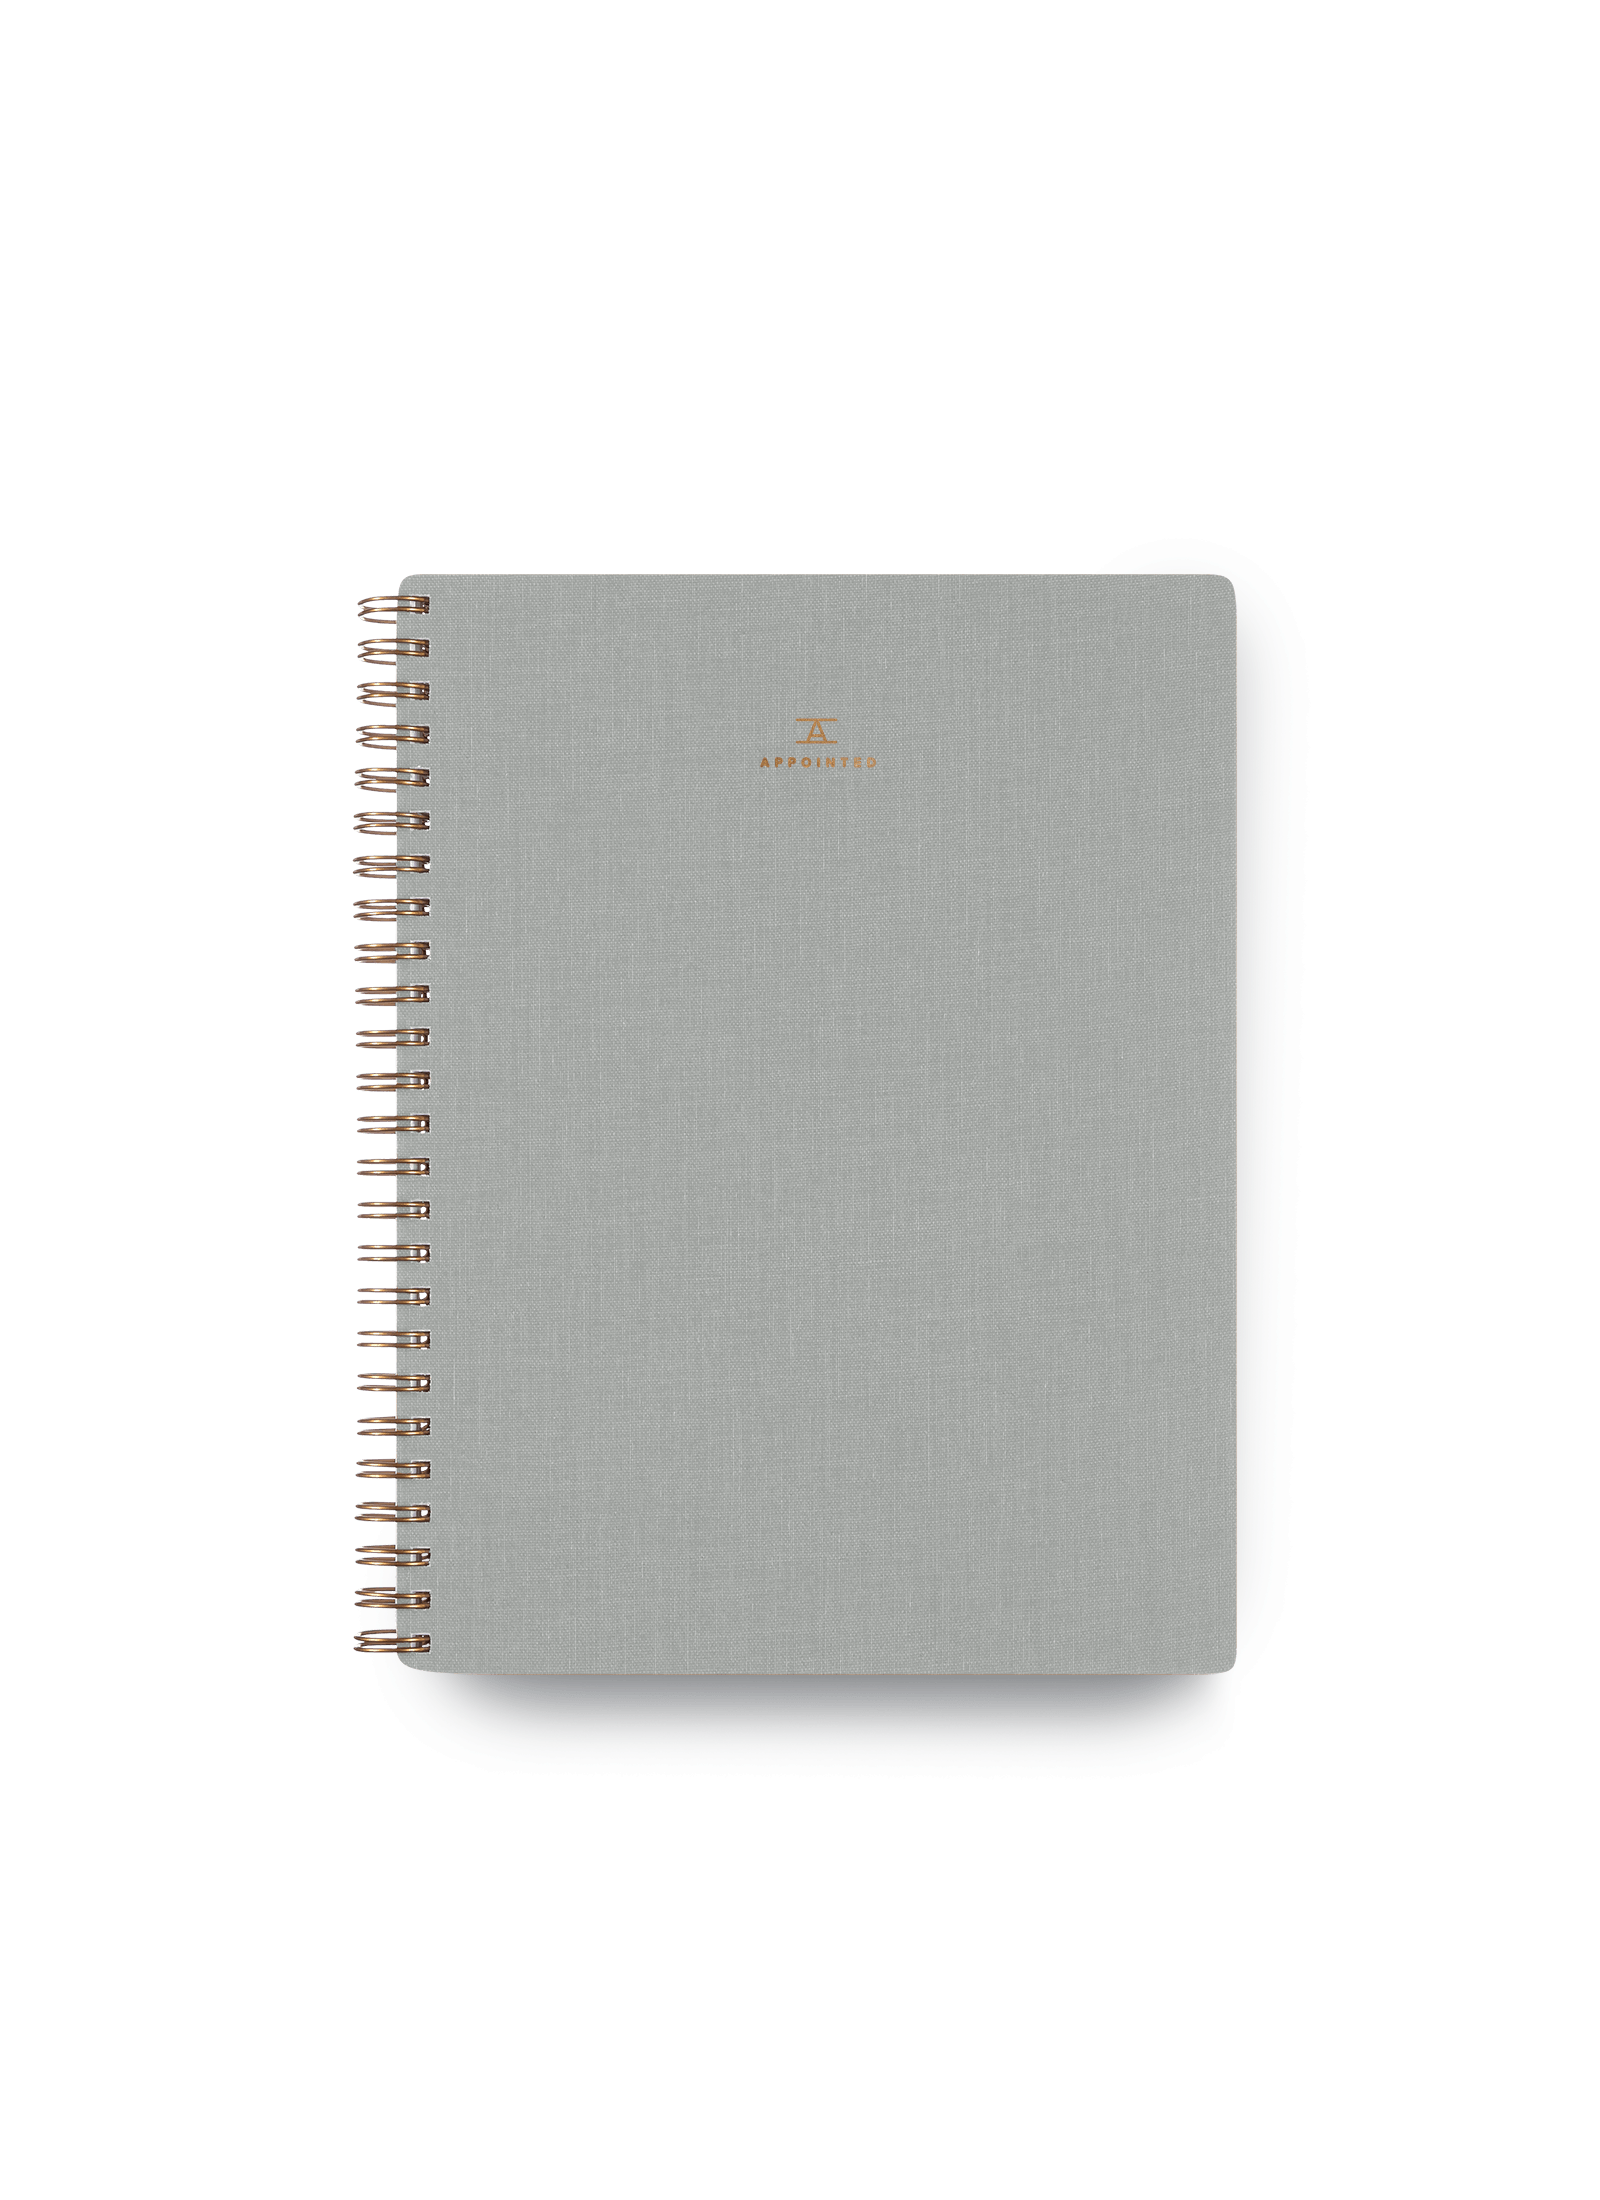 Appointed Workbook in Natural Linen bookcloth with brass wire-o binding front cover || Dove Gray